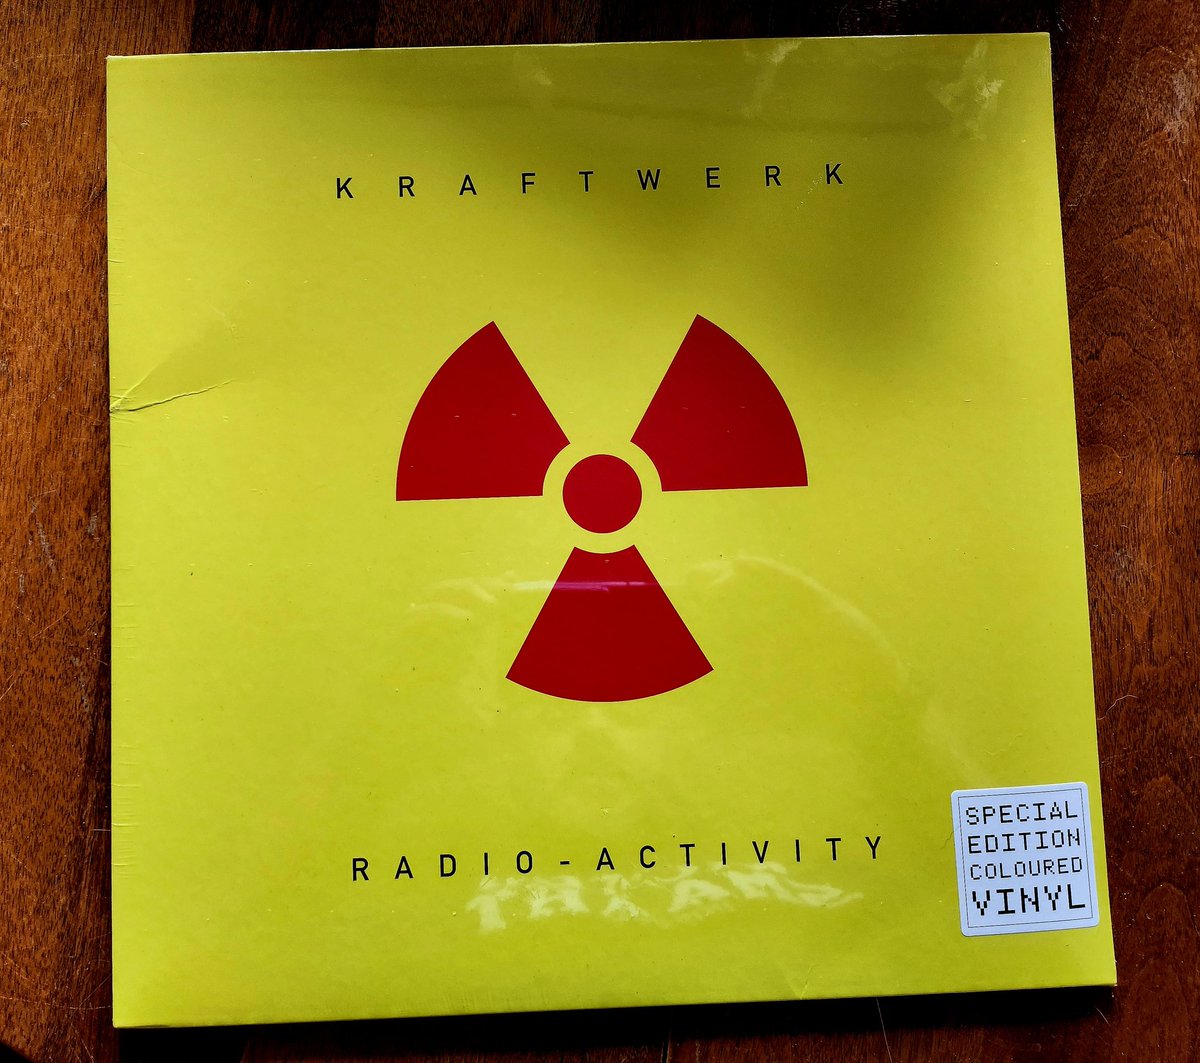 Mail day! Picked up some German Electronic on Amazon a few days ago. Should be some good spins later today... 🤘🎶💿

#vinyl #vinylcollection #vinylcollector #vinylcollectors #vinylrecord #vinylrecords #record #recordcollection #recordcollector #kraftwerk #radioactivity